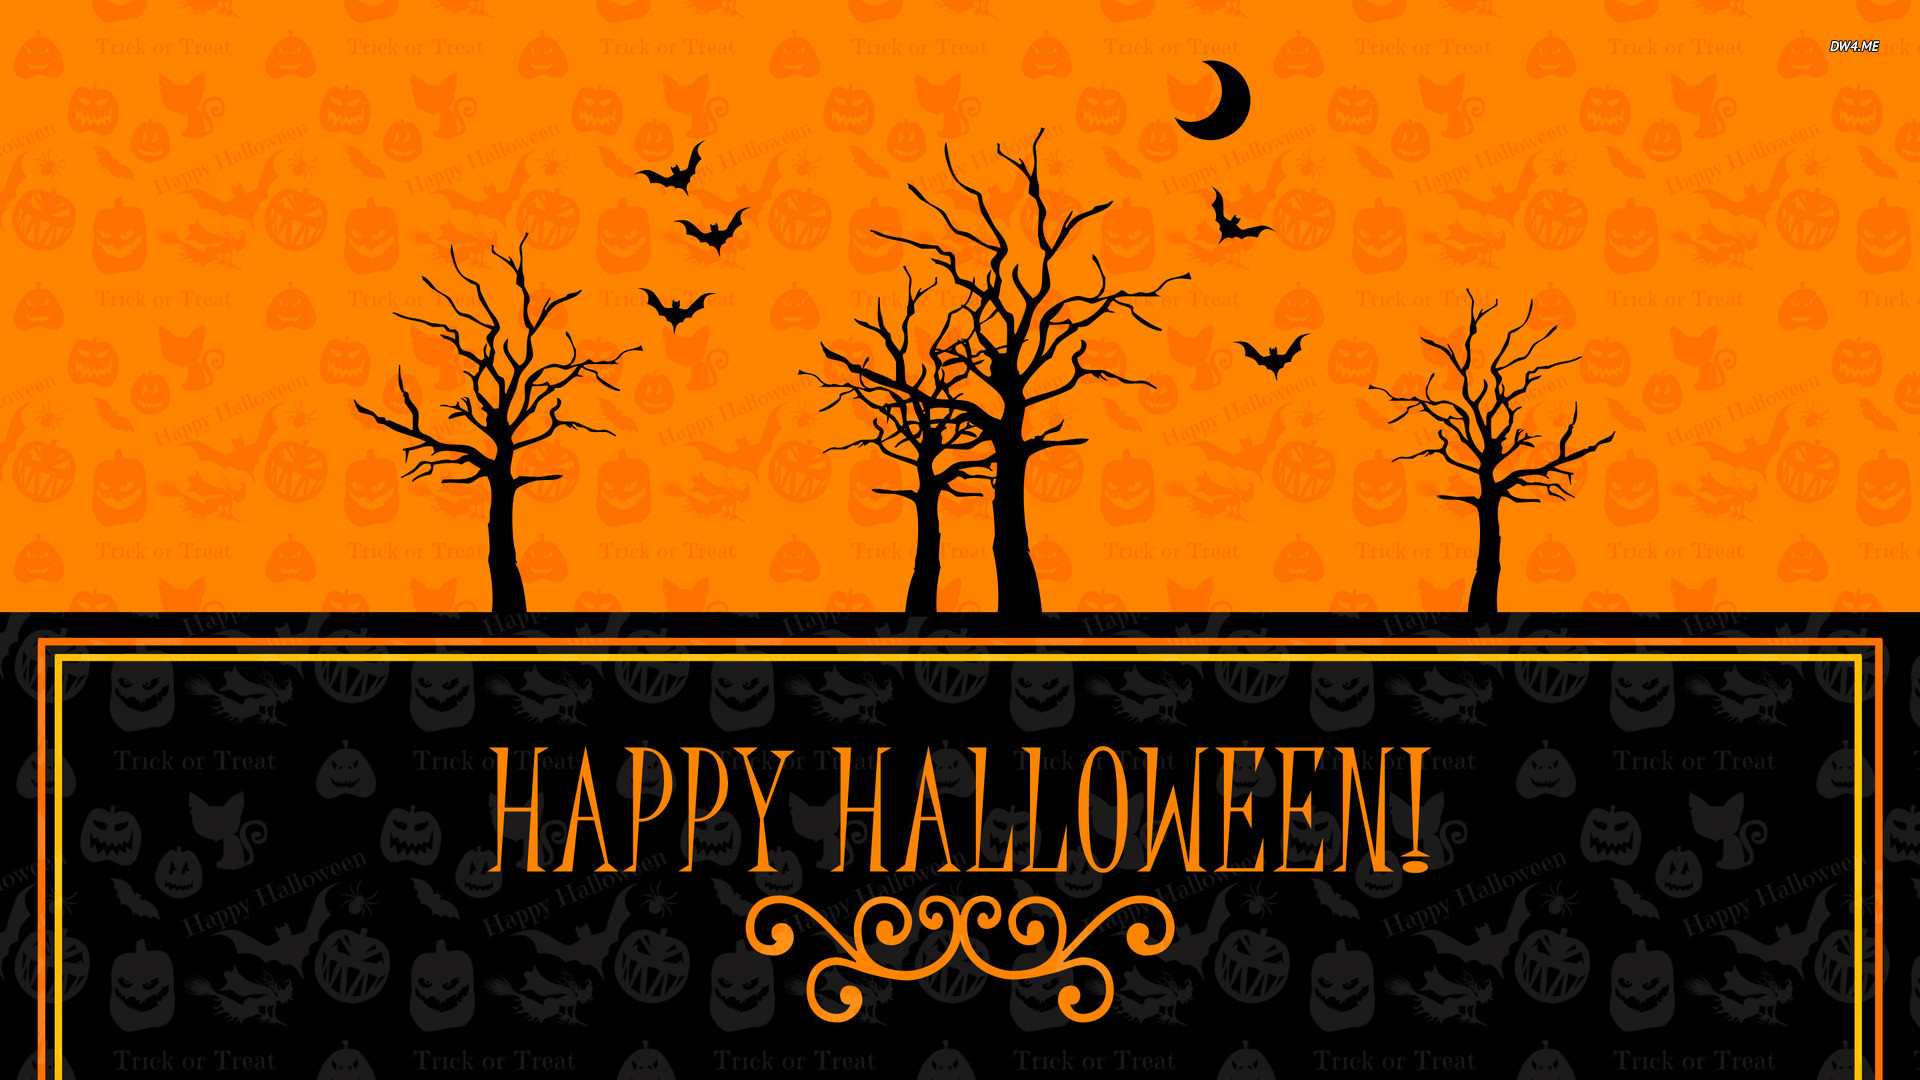 1920x1080 Happy Halloween Greetings And Wishes | WebUps. Happy Halloween Greetings  And Wishes WebUps